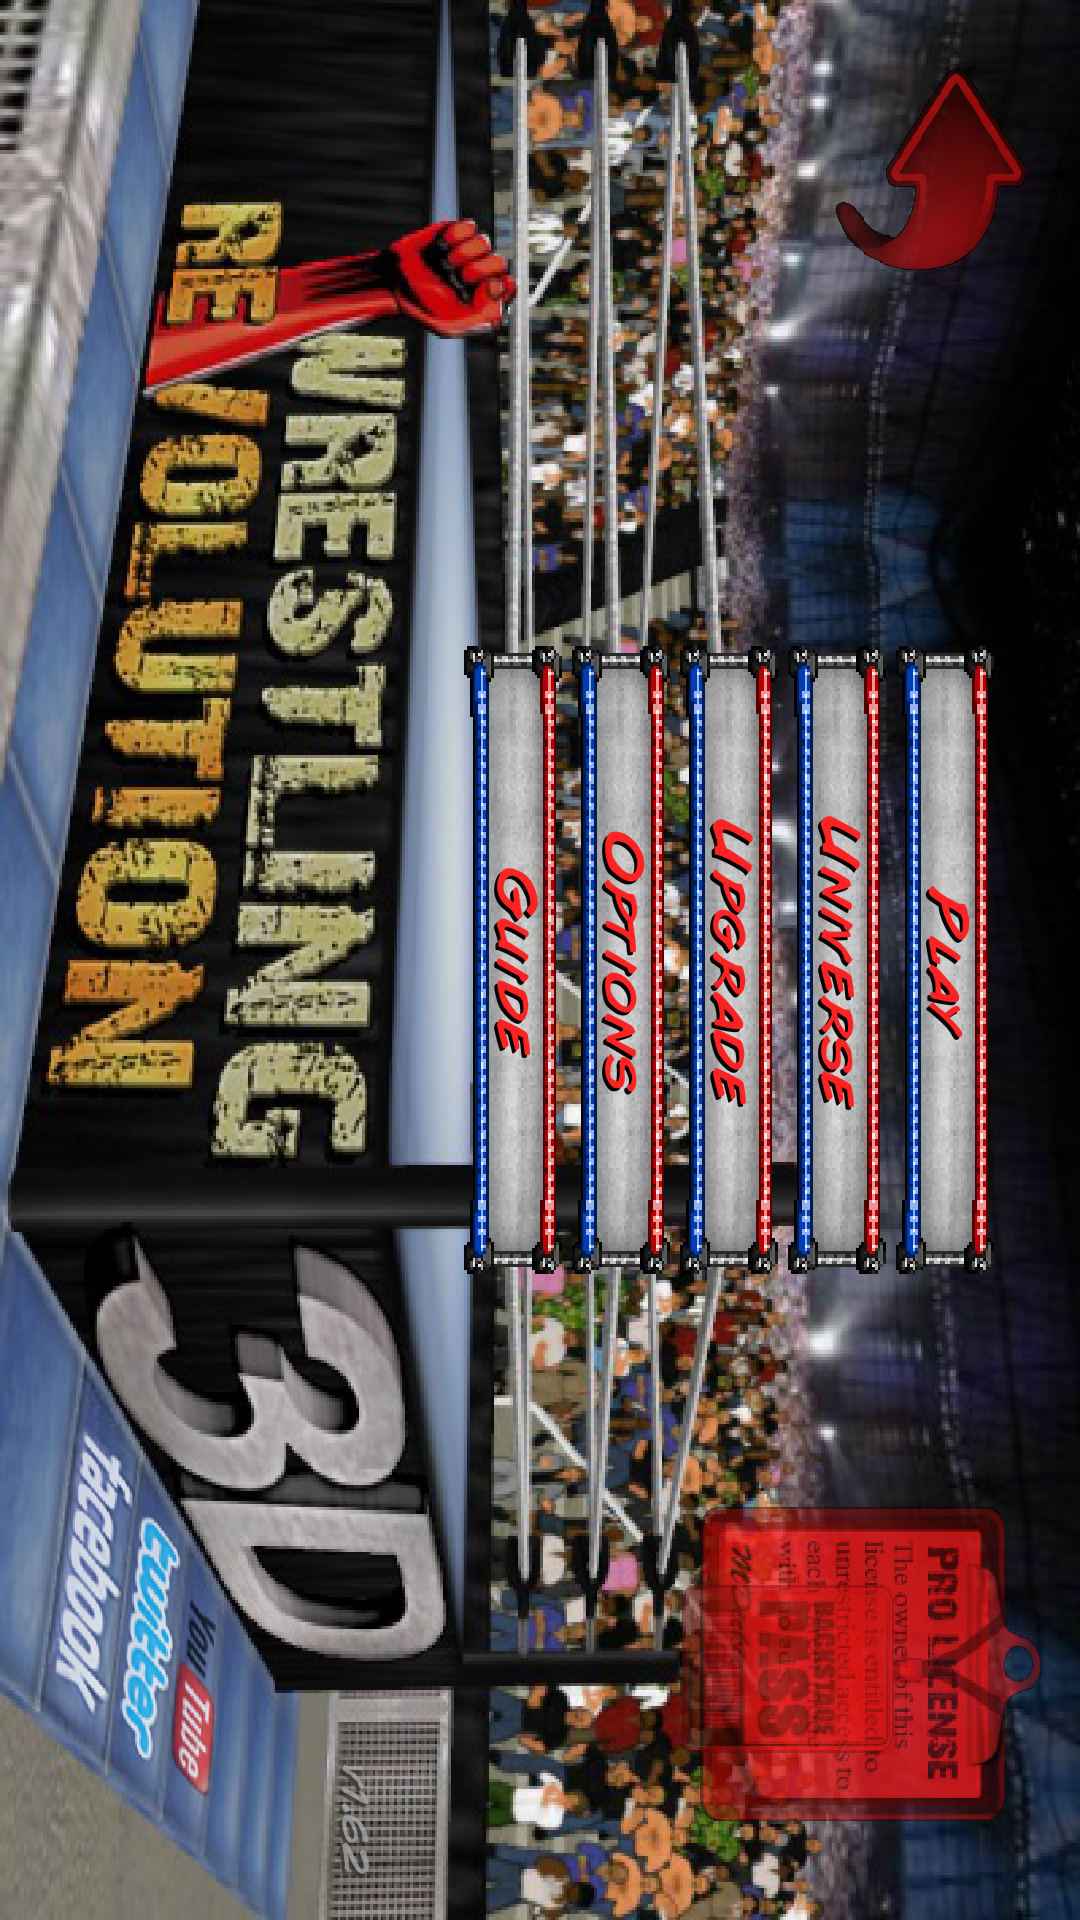 Wrestling Revolution 3D(This Game Can Experience The Full Content)